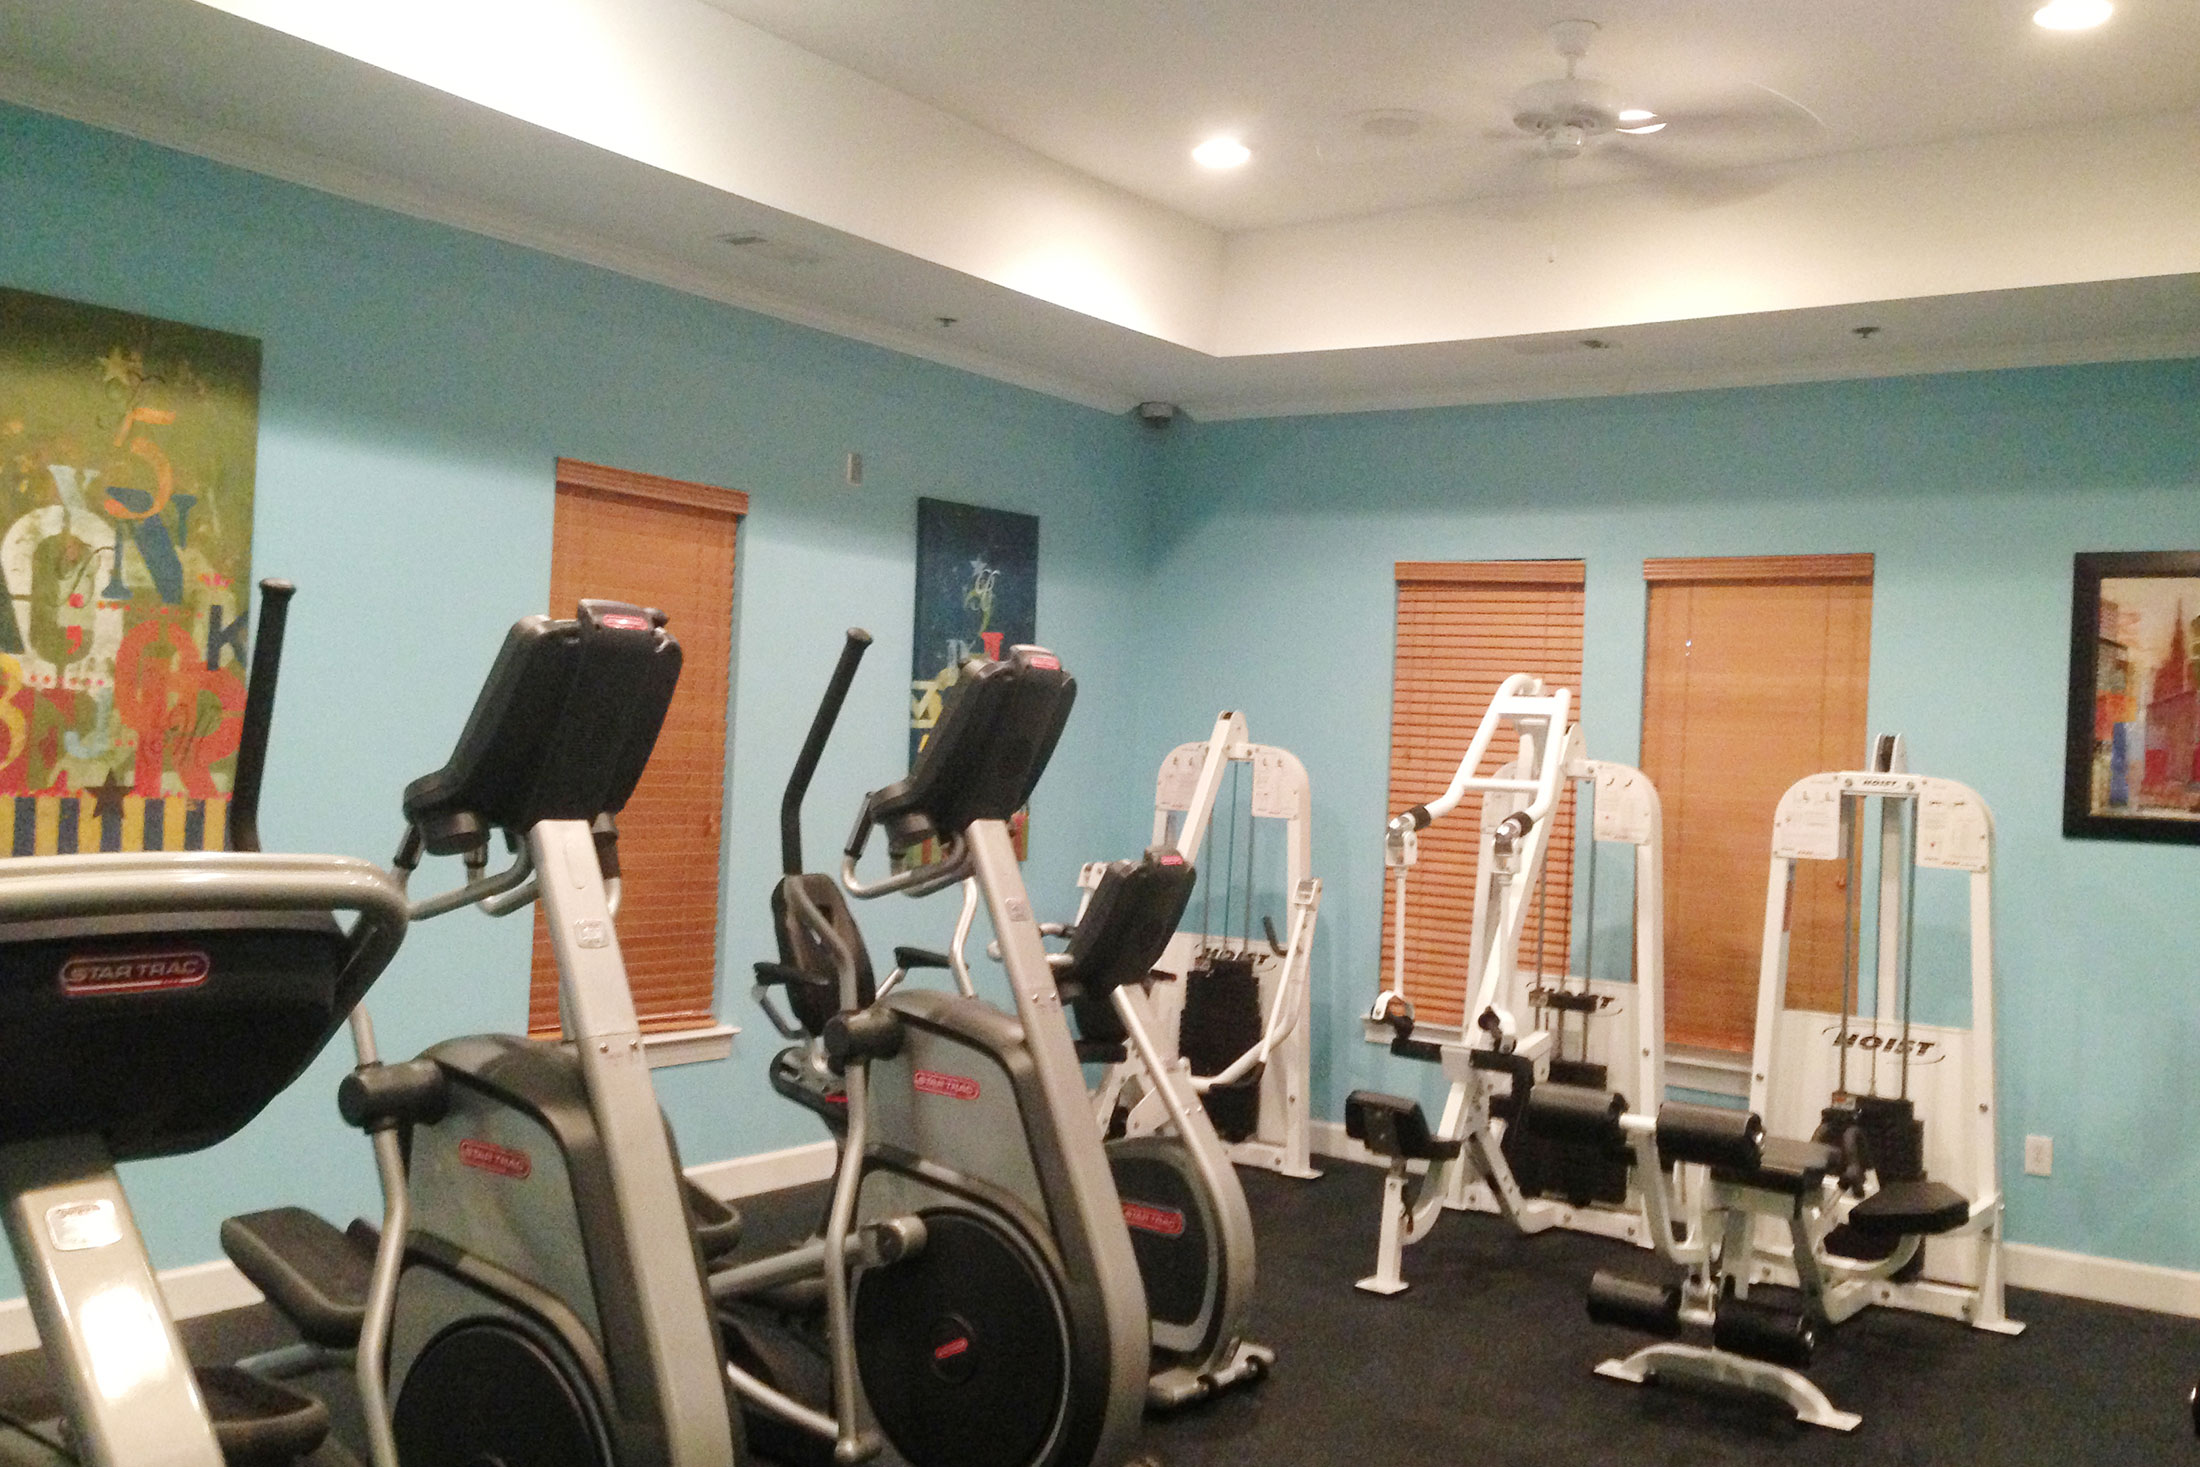 Fitness center with treadmills, elliptical machines, and weight lifting machines.